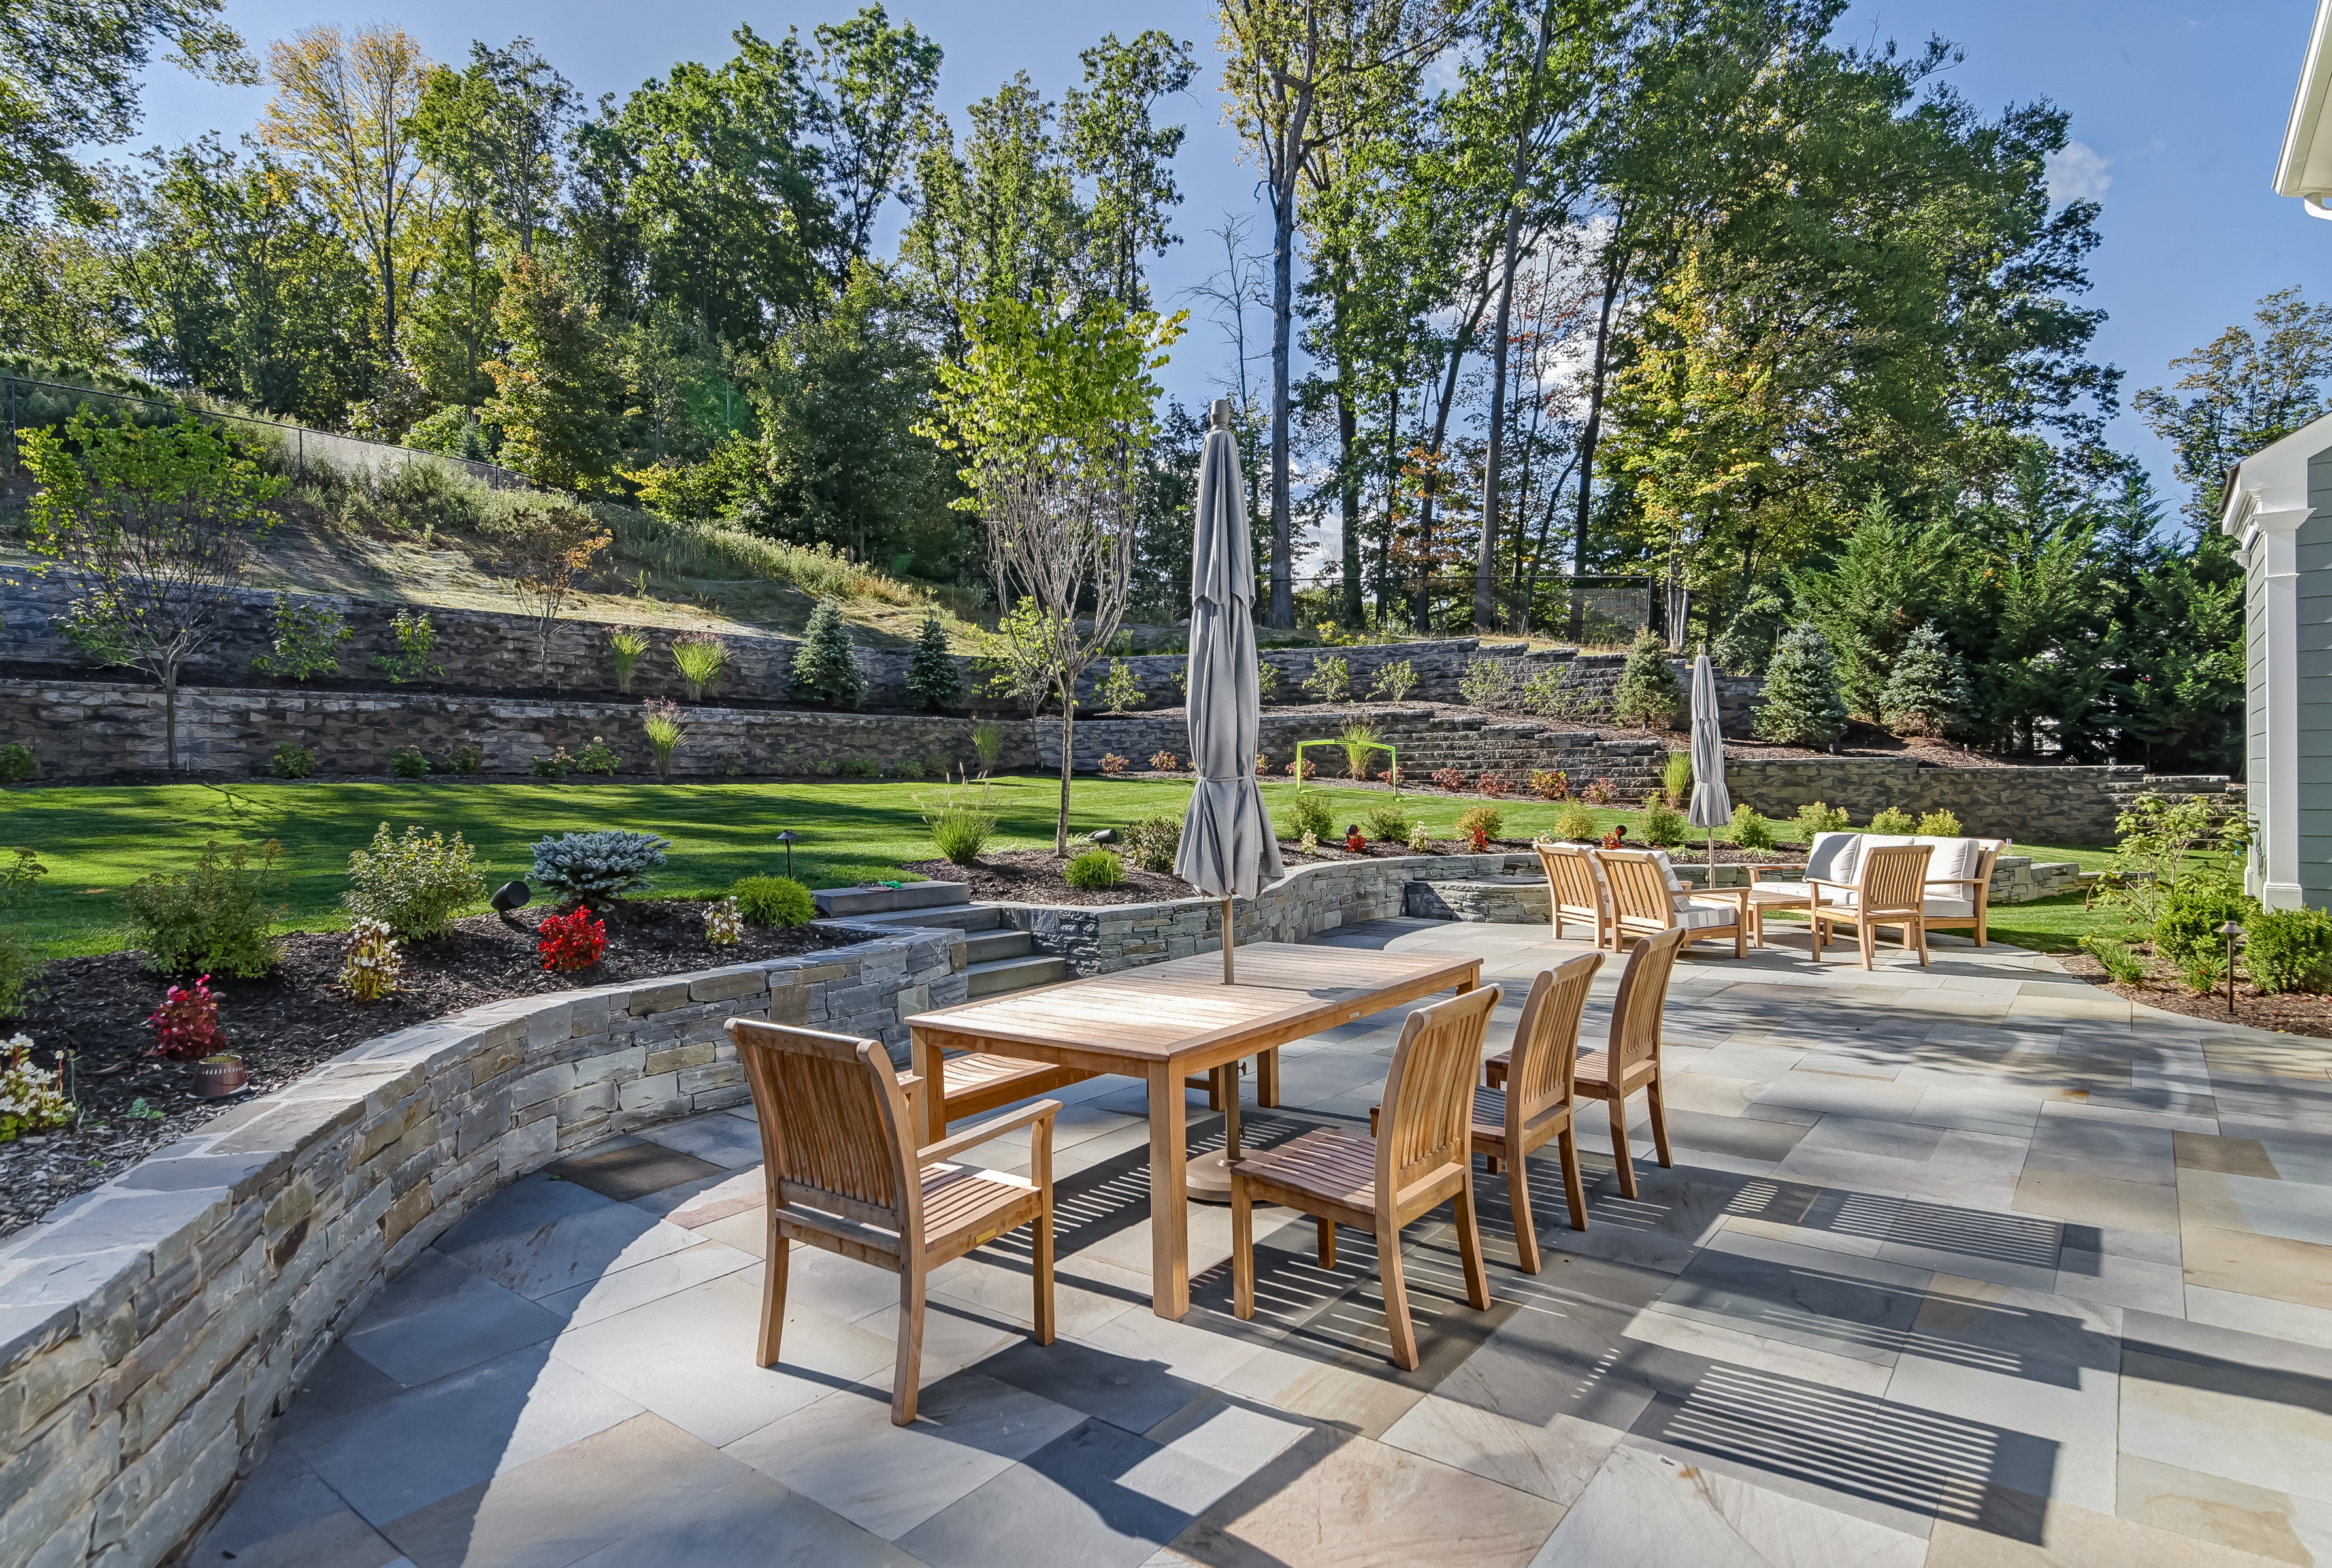 24 – Beautiful Patio, Perfect for Entertaining – 20 Troy Drive, Example of Most Recent Project from Builder